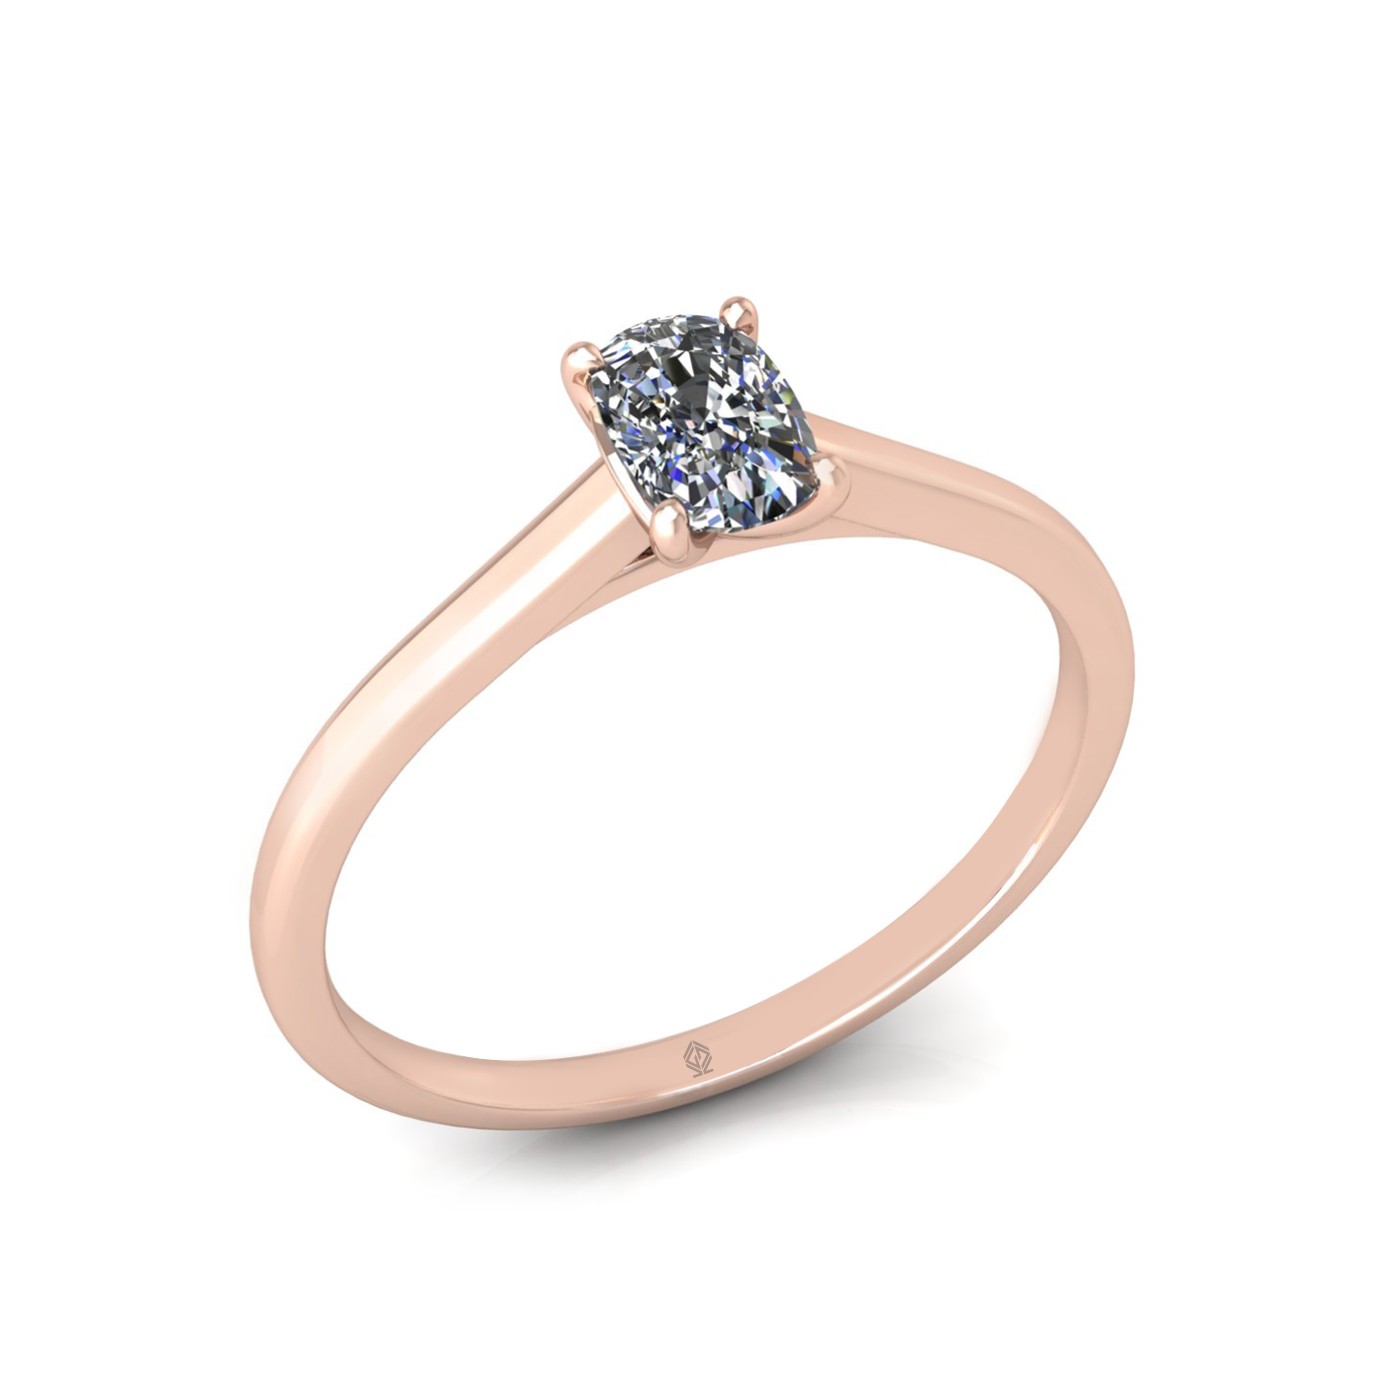 18k rose gold  0,50 ct 4 prongs solitaire elongated cushion cut diamond engagement ring with whisper thin band Photos & images